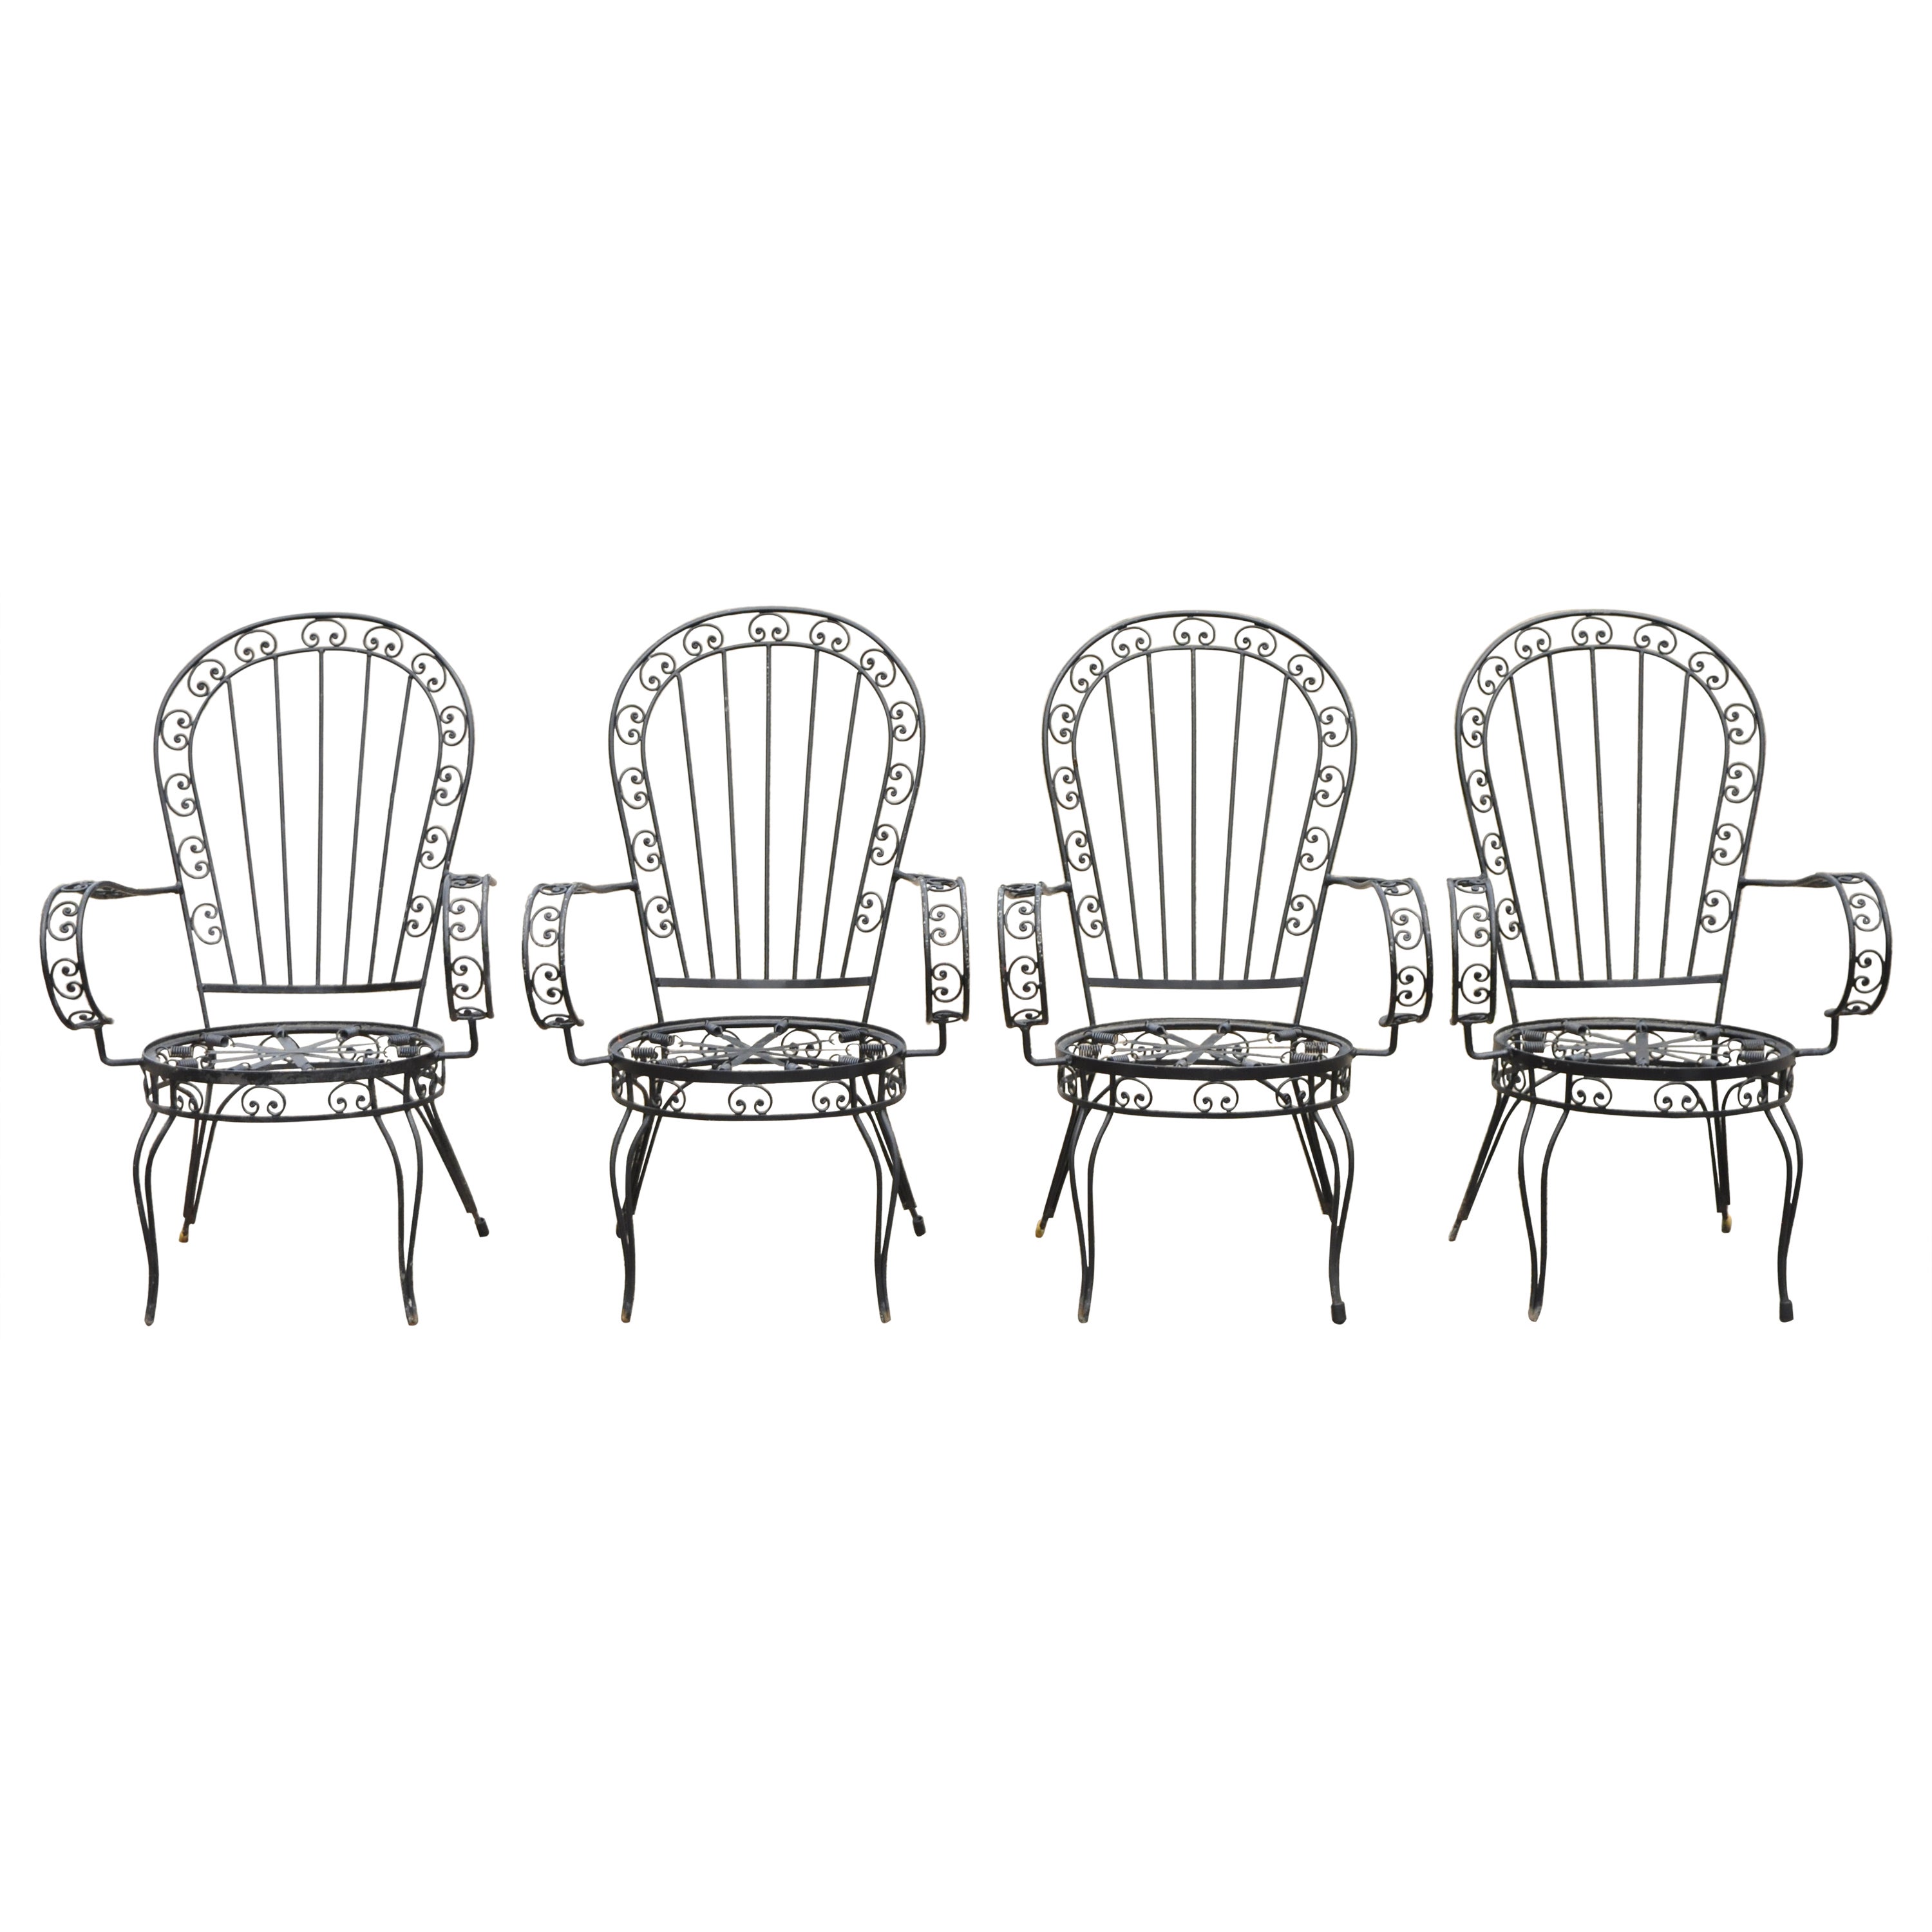 Vintage Italian Regency Wrought Iron Fan Back Sunroom Dining Chairs - Set of 4 For Sale